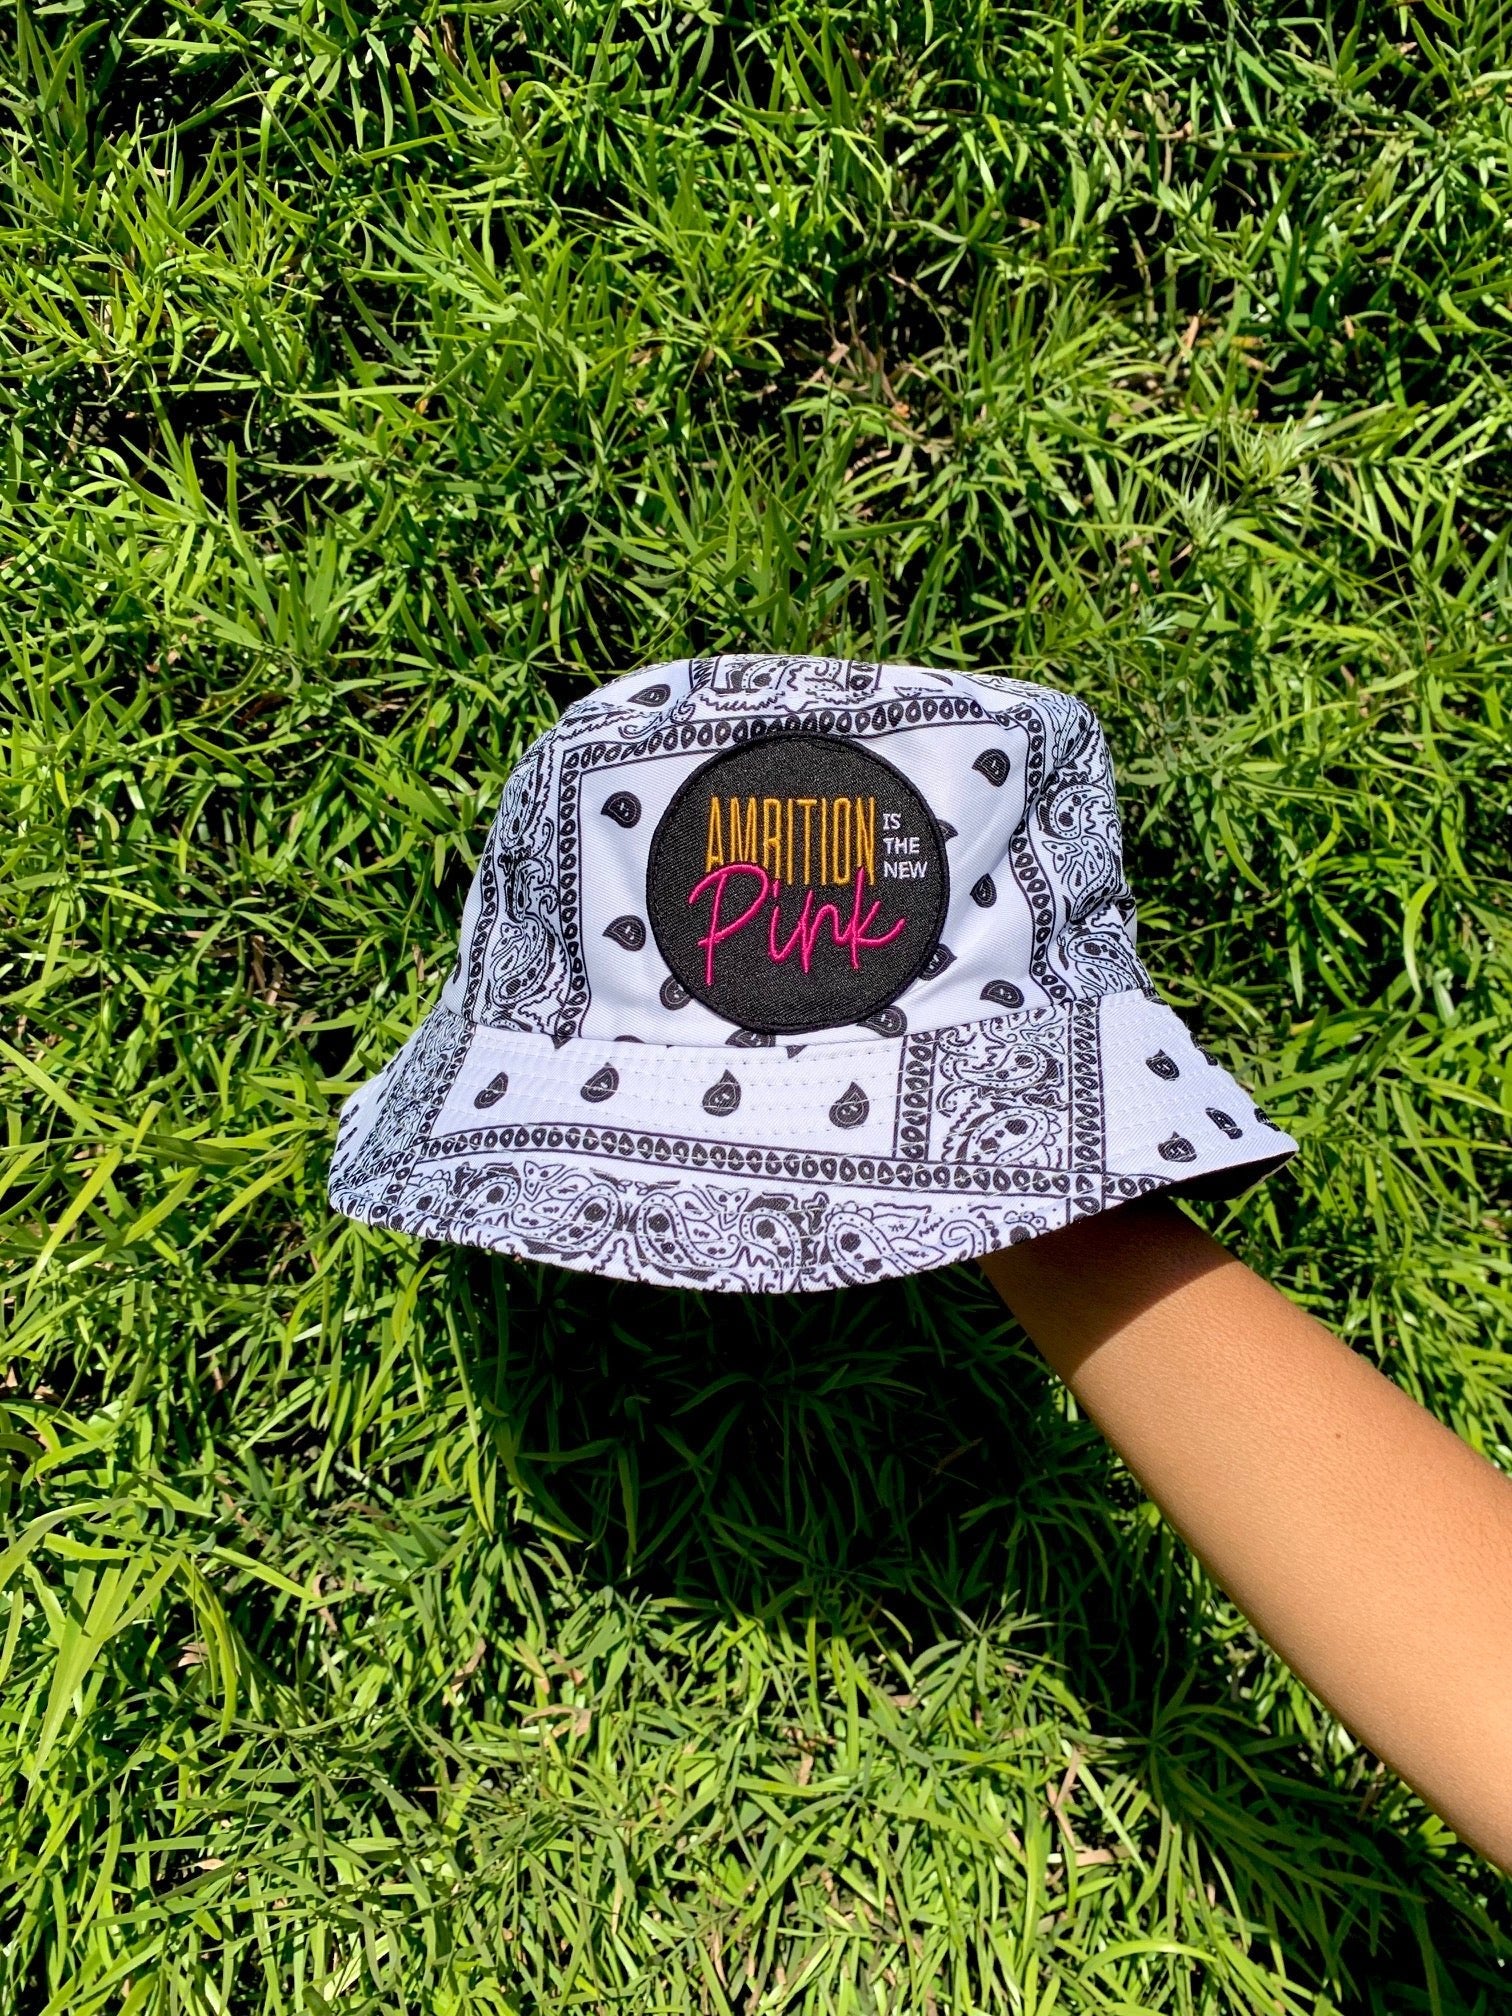 Bandana Dreams Bucket Hat - Ambition Is The New Pink